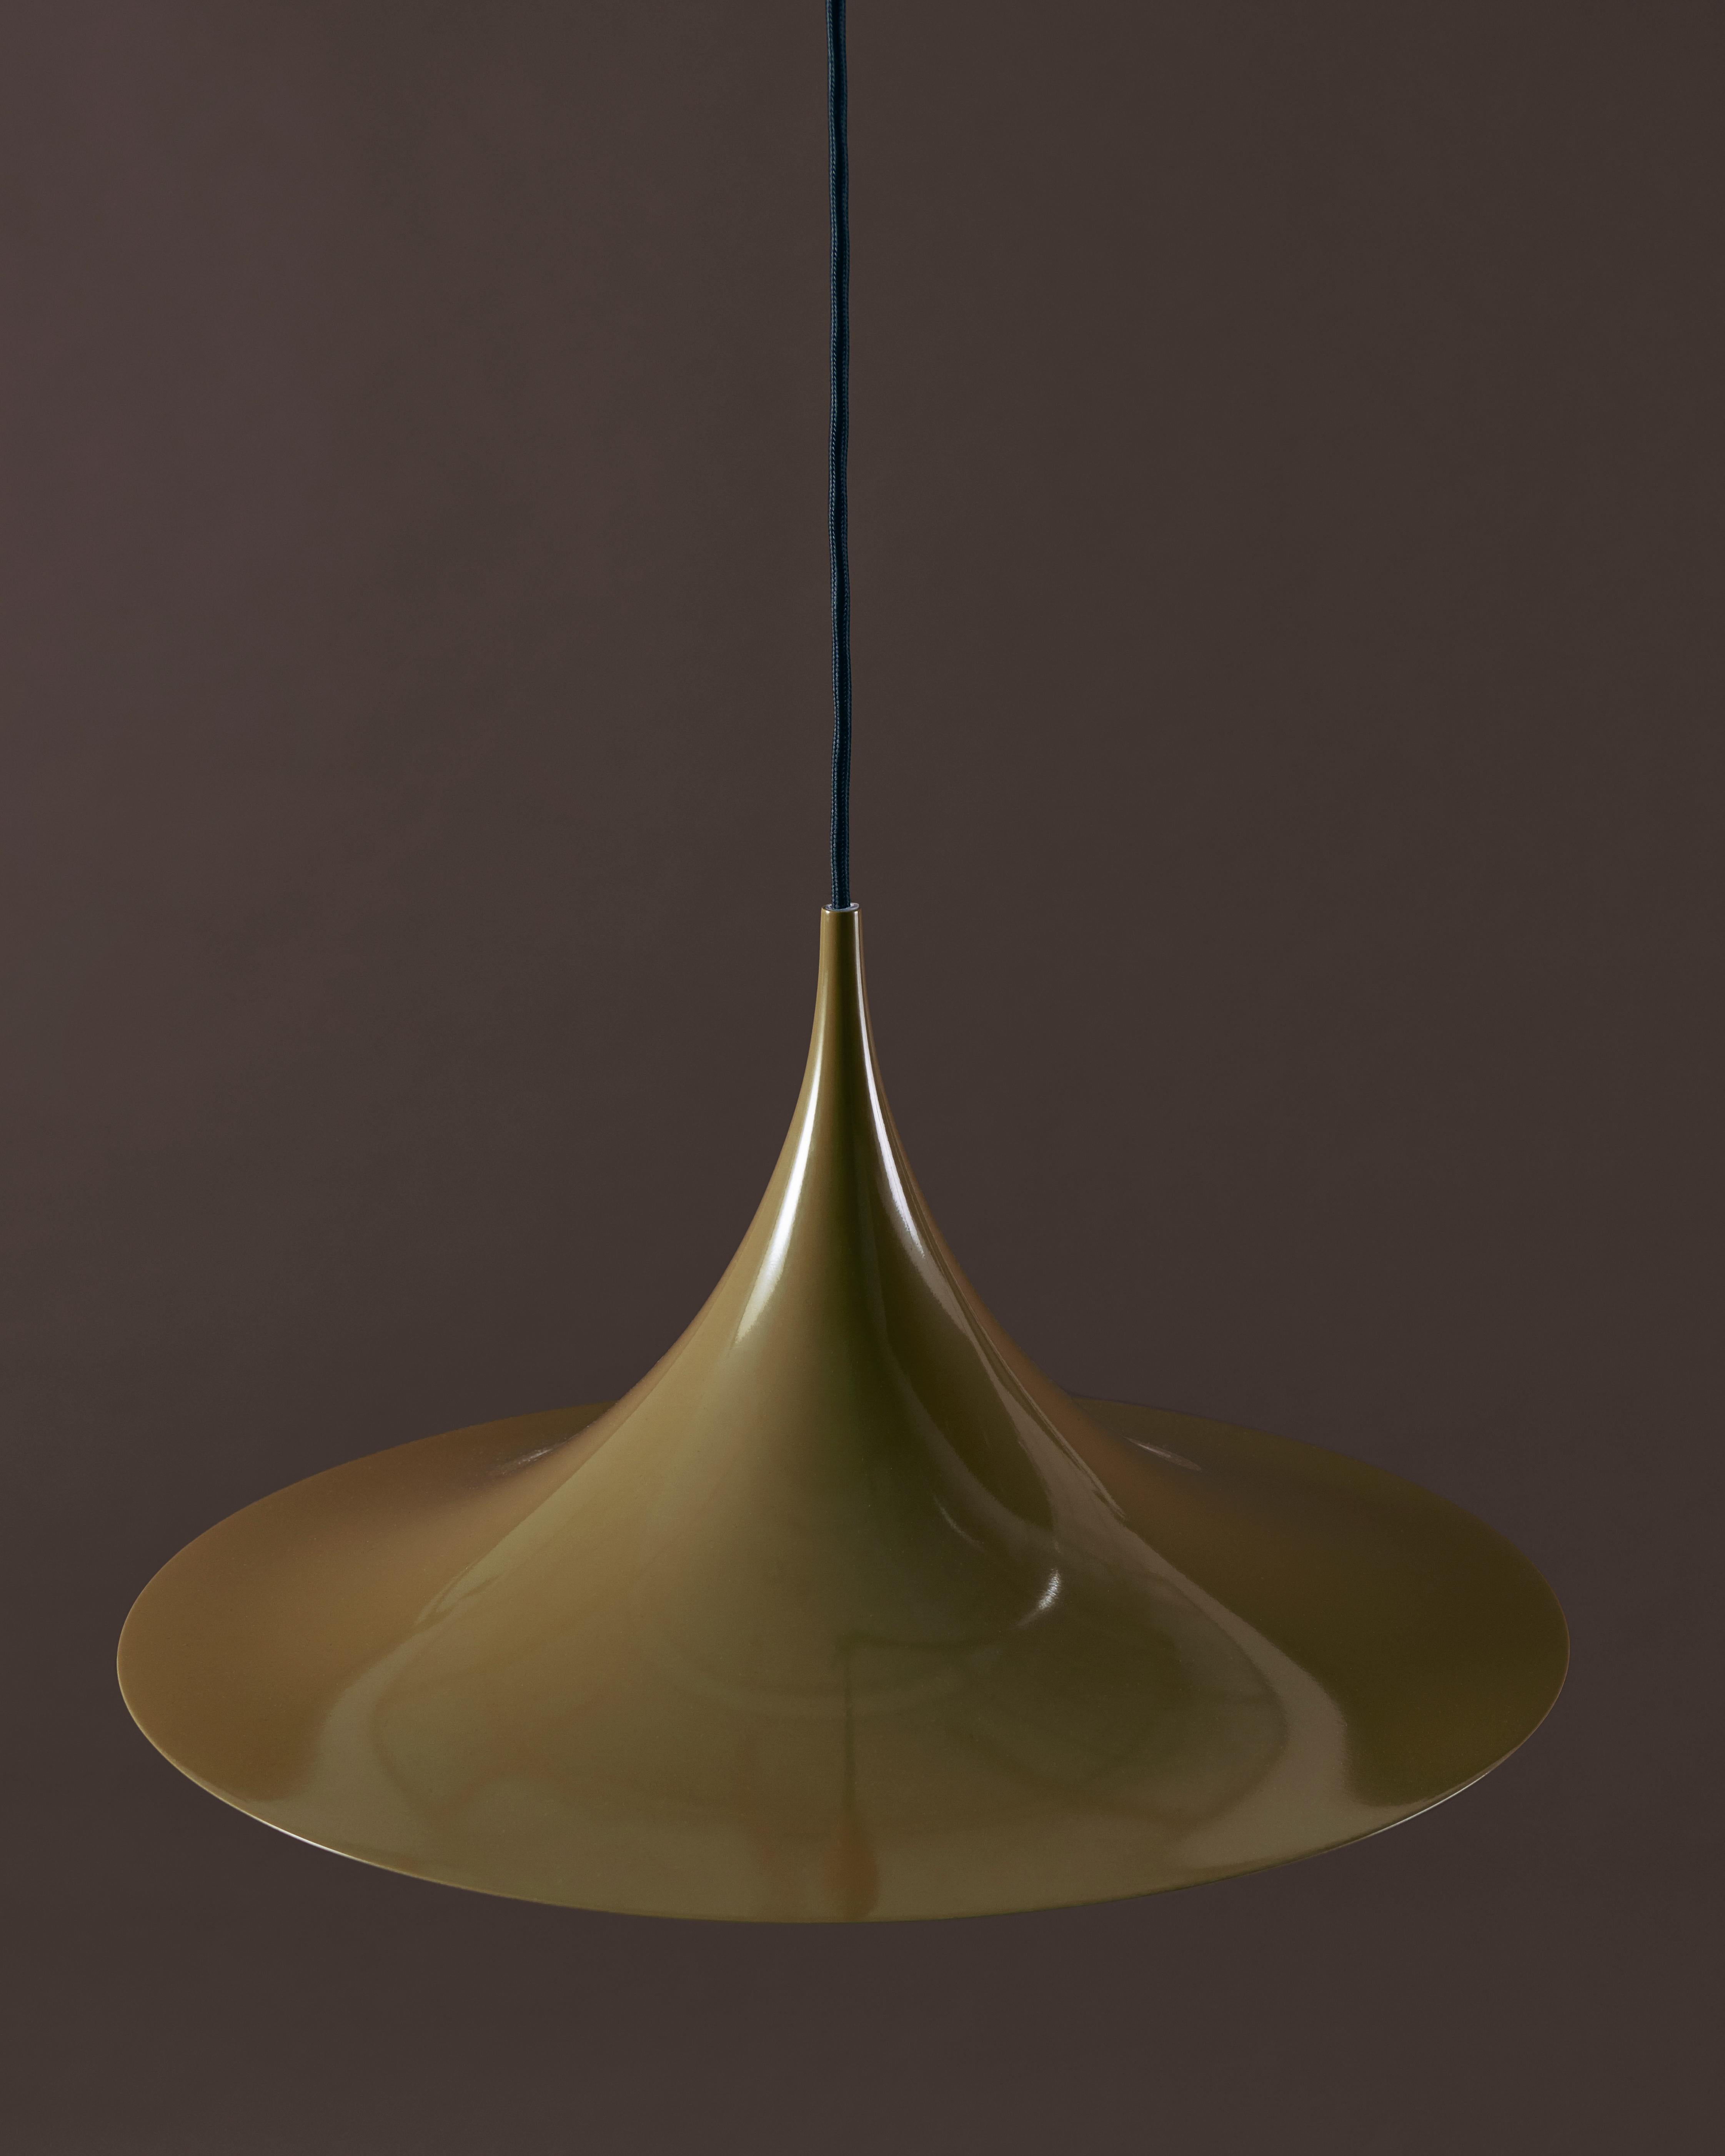 Bonderup & Thorup 'Semi' Pendant in Fennel Seed For Sale 5